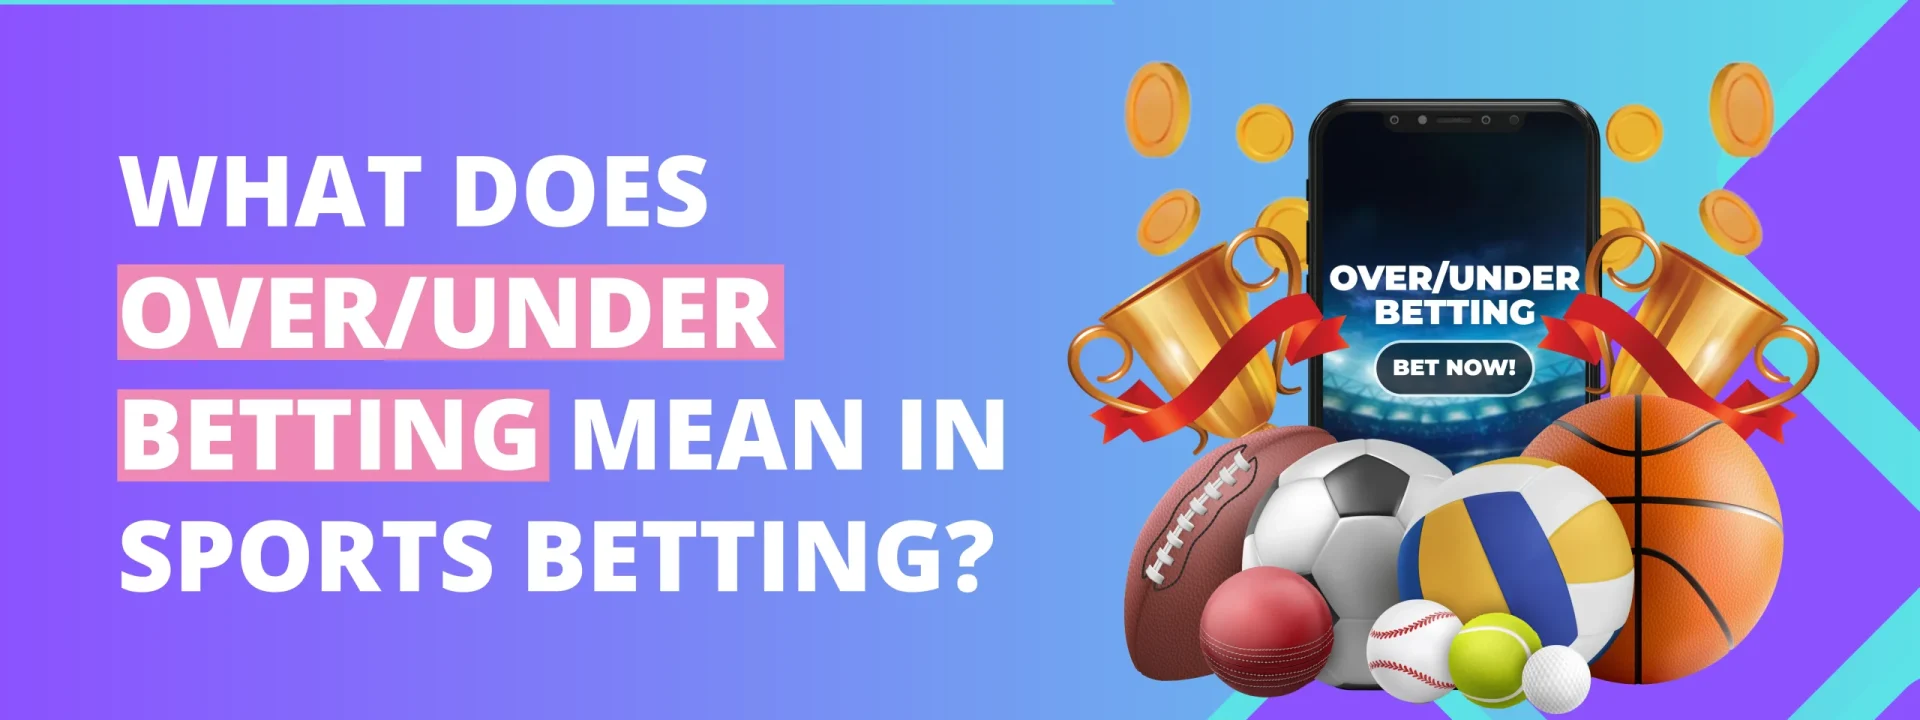 What Does Over Under Betting Mean in Sports Betting